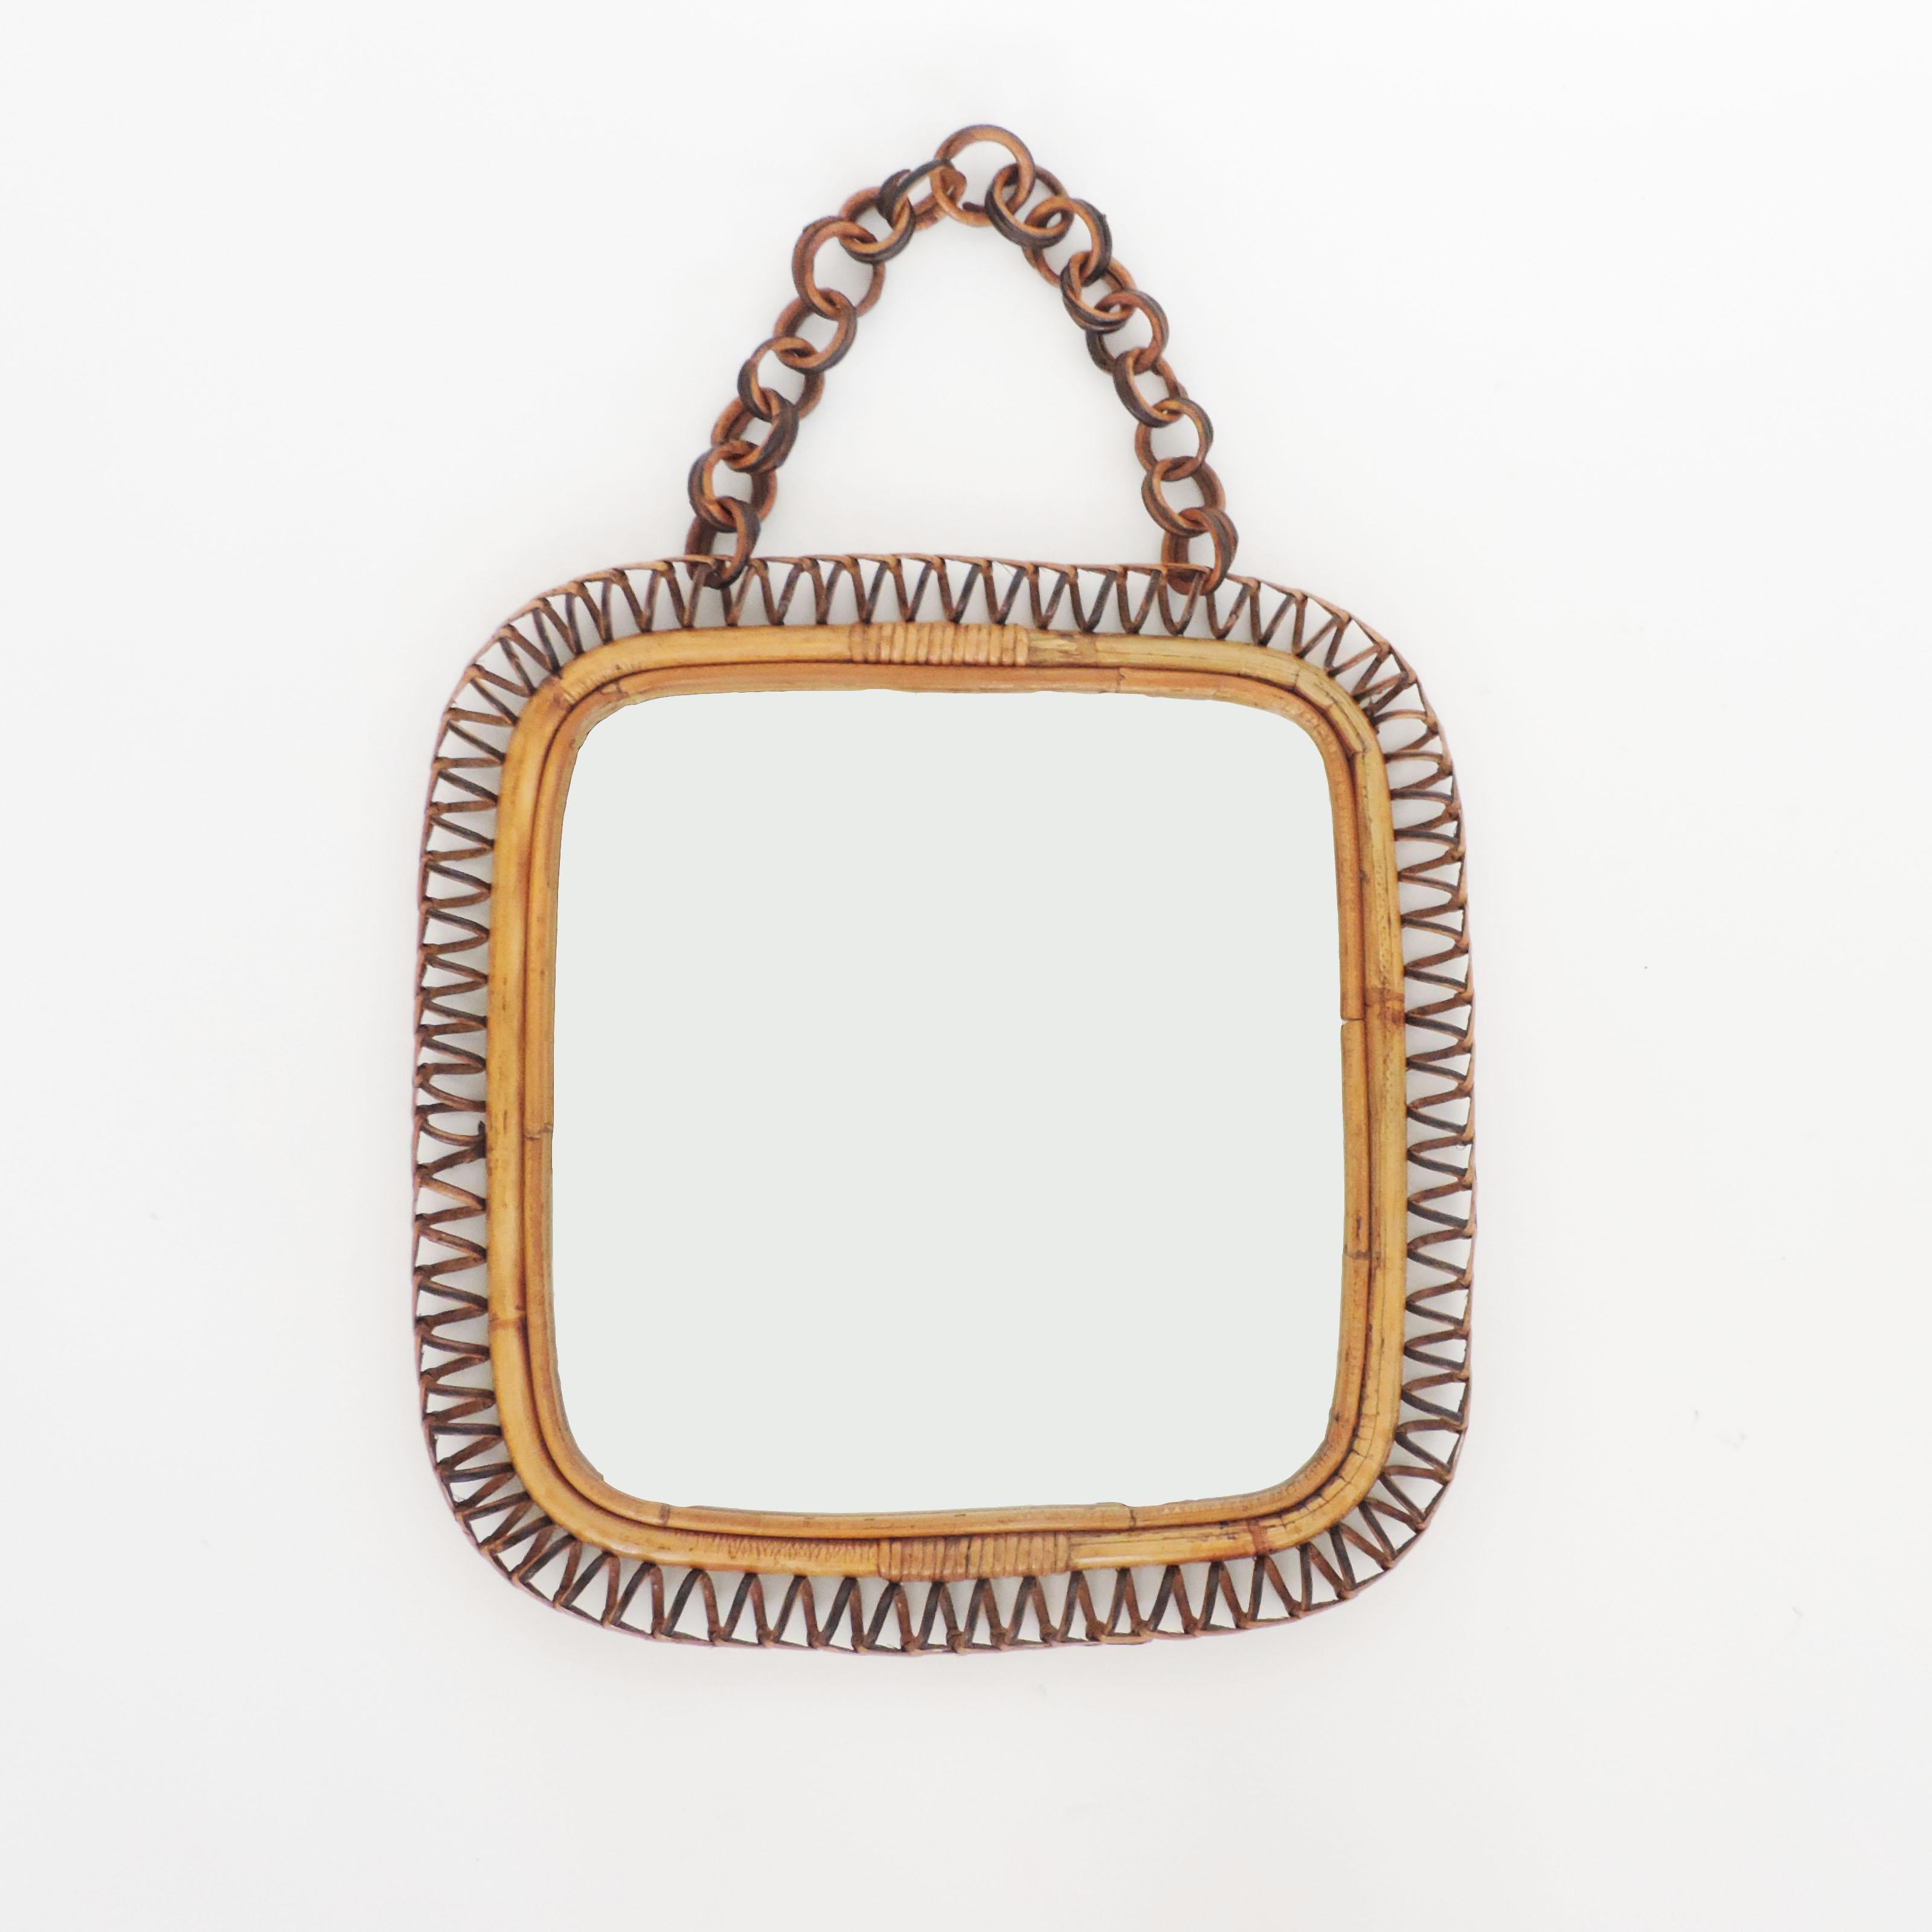 Mid-20th Century Square and Undulating Wicker and Bamboo Wall Mirror, Italy, 1950s